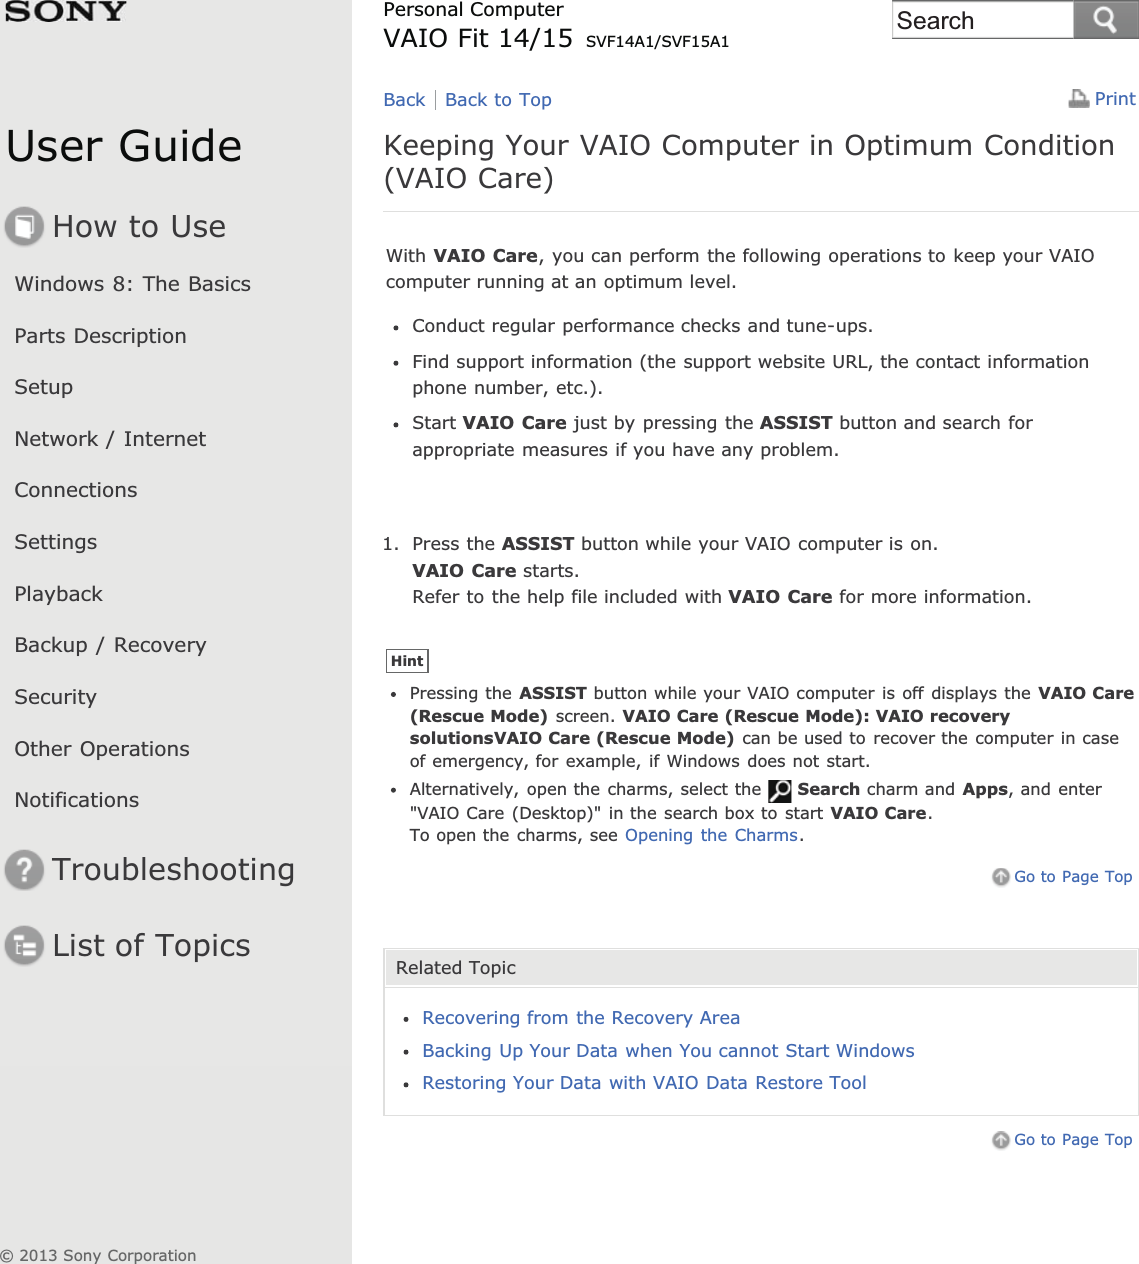 User GuideHow to UseWindows 8: The BasicsParts DescriptionSetupNetwork / InternetConnectionsSettingsPlaybackBackup / RecoverySecurityOther OperationsNotificationsTroubleshootingList of TopicsPrintPersonal ComputerVAIO Fit 14/15 SVF14A1/SVF15A1Keeping Your VAIO Computer in Optimum Condition(VAIO Care)With VAIO Care, you can perform the following operations to keep your VAIOcomputer running at an optimum level.Conduct regular performance checks and tune-ups.Find support information (the support website URL, the contact informationphone number, etc.).Start VAIO Care just by pressing the ASSIST button and search forappropriate measures if you have any problem.1. Press the ASSIST button while your VAIO computer is on.VAIO Care starts.Refer to the help file included with VAIO Care for more information.HintPressing the ASSIST button while your VAIO computer is off displays the VAIO Care(Rescue Mode) screen. VAIO Care (Rescue Mode): VAIO recoverysolutionsVAIO Care (Rescue Mode) can be used to recover the computer in caseof emergency, for example, if Windows does not start.Alternatively, open the charms, select the Search charm and Apps, and enter&quot;VAIO Care (Desktop)&quot; in the search box to start VAIO Care.To open the charms, see Opening the Charms.Go to Page TopRelated TopicRecovering from the Recovery AreaBacking Up Your Data when You cannot Start WindowsRestoring Your Data with VAIO Data Restore ToolGo to Page TopBack Back to Top© 2013 Sony CorporationSearch